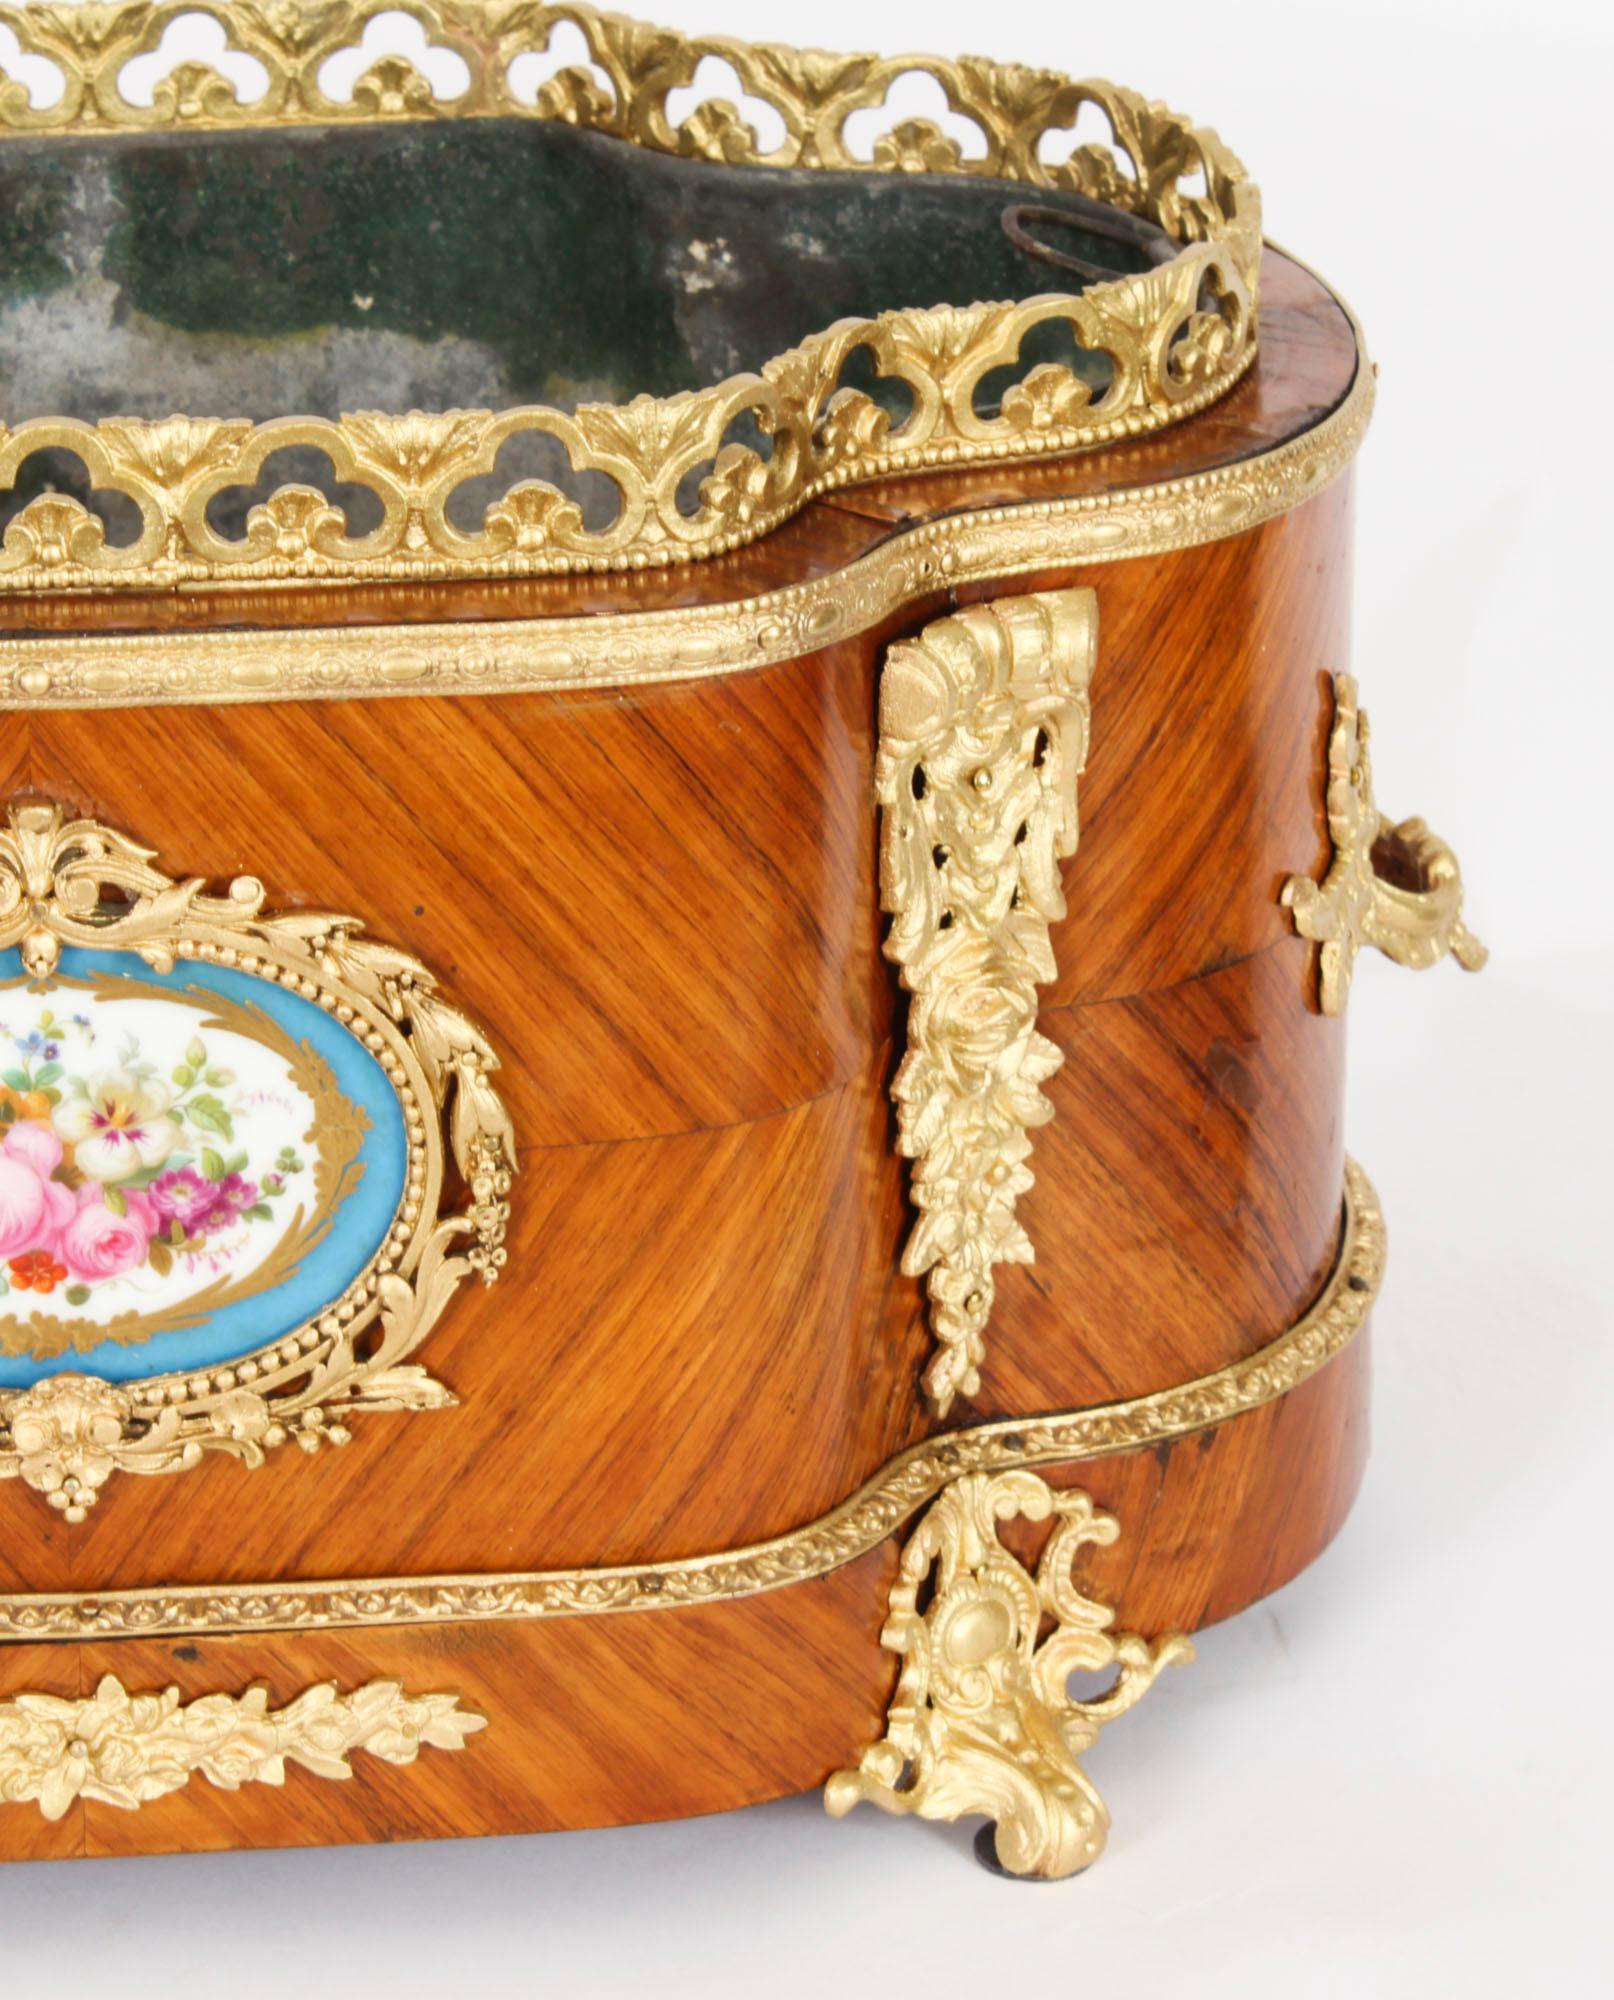 Antique French Sevres Porcelain Ormolu Mounted Planter Jardiniere 19th Century For Sale 8